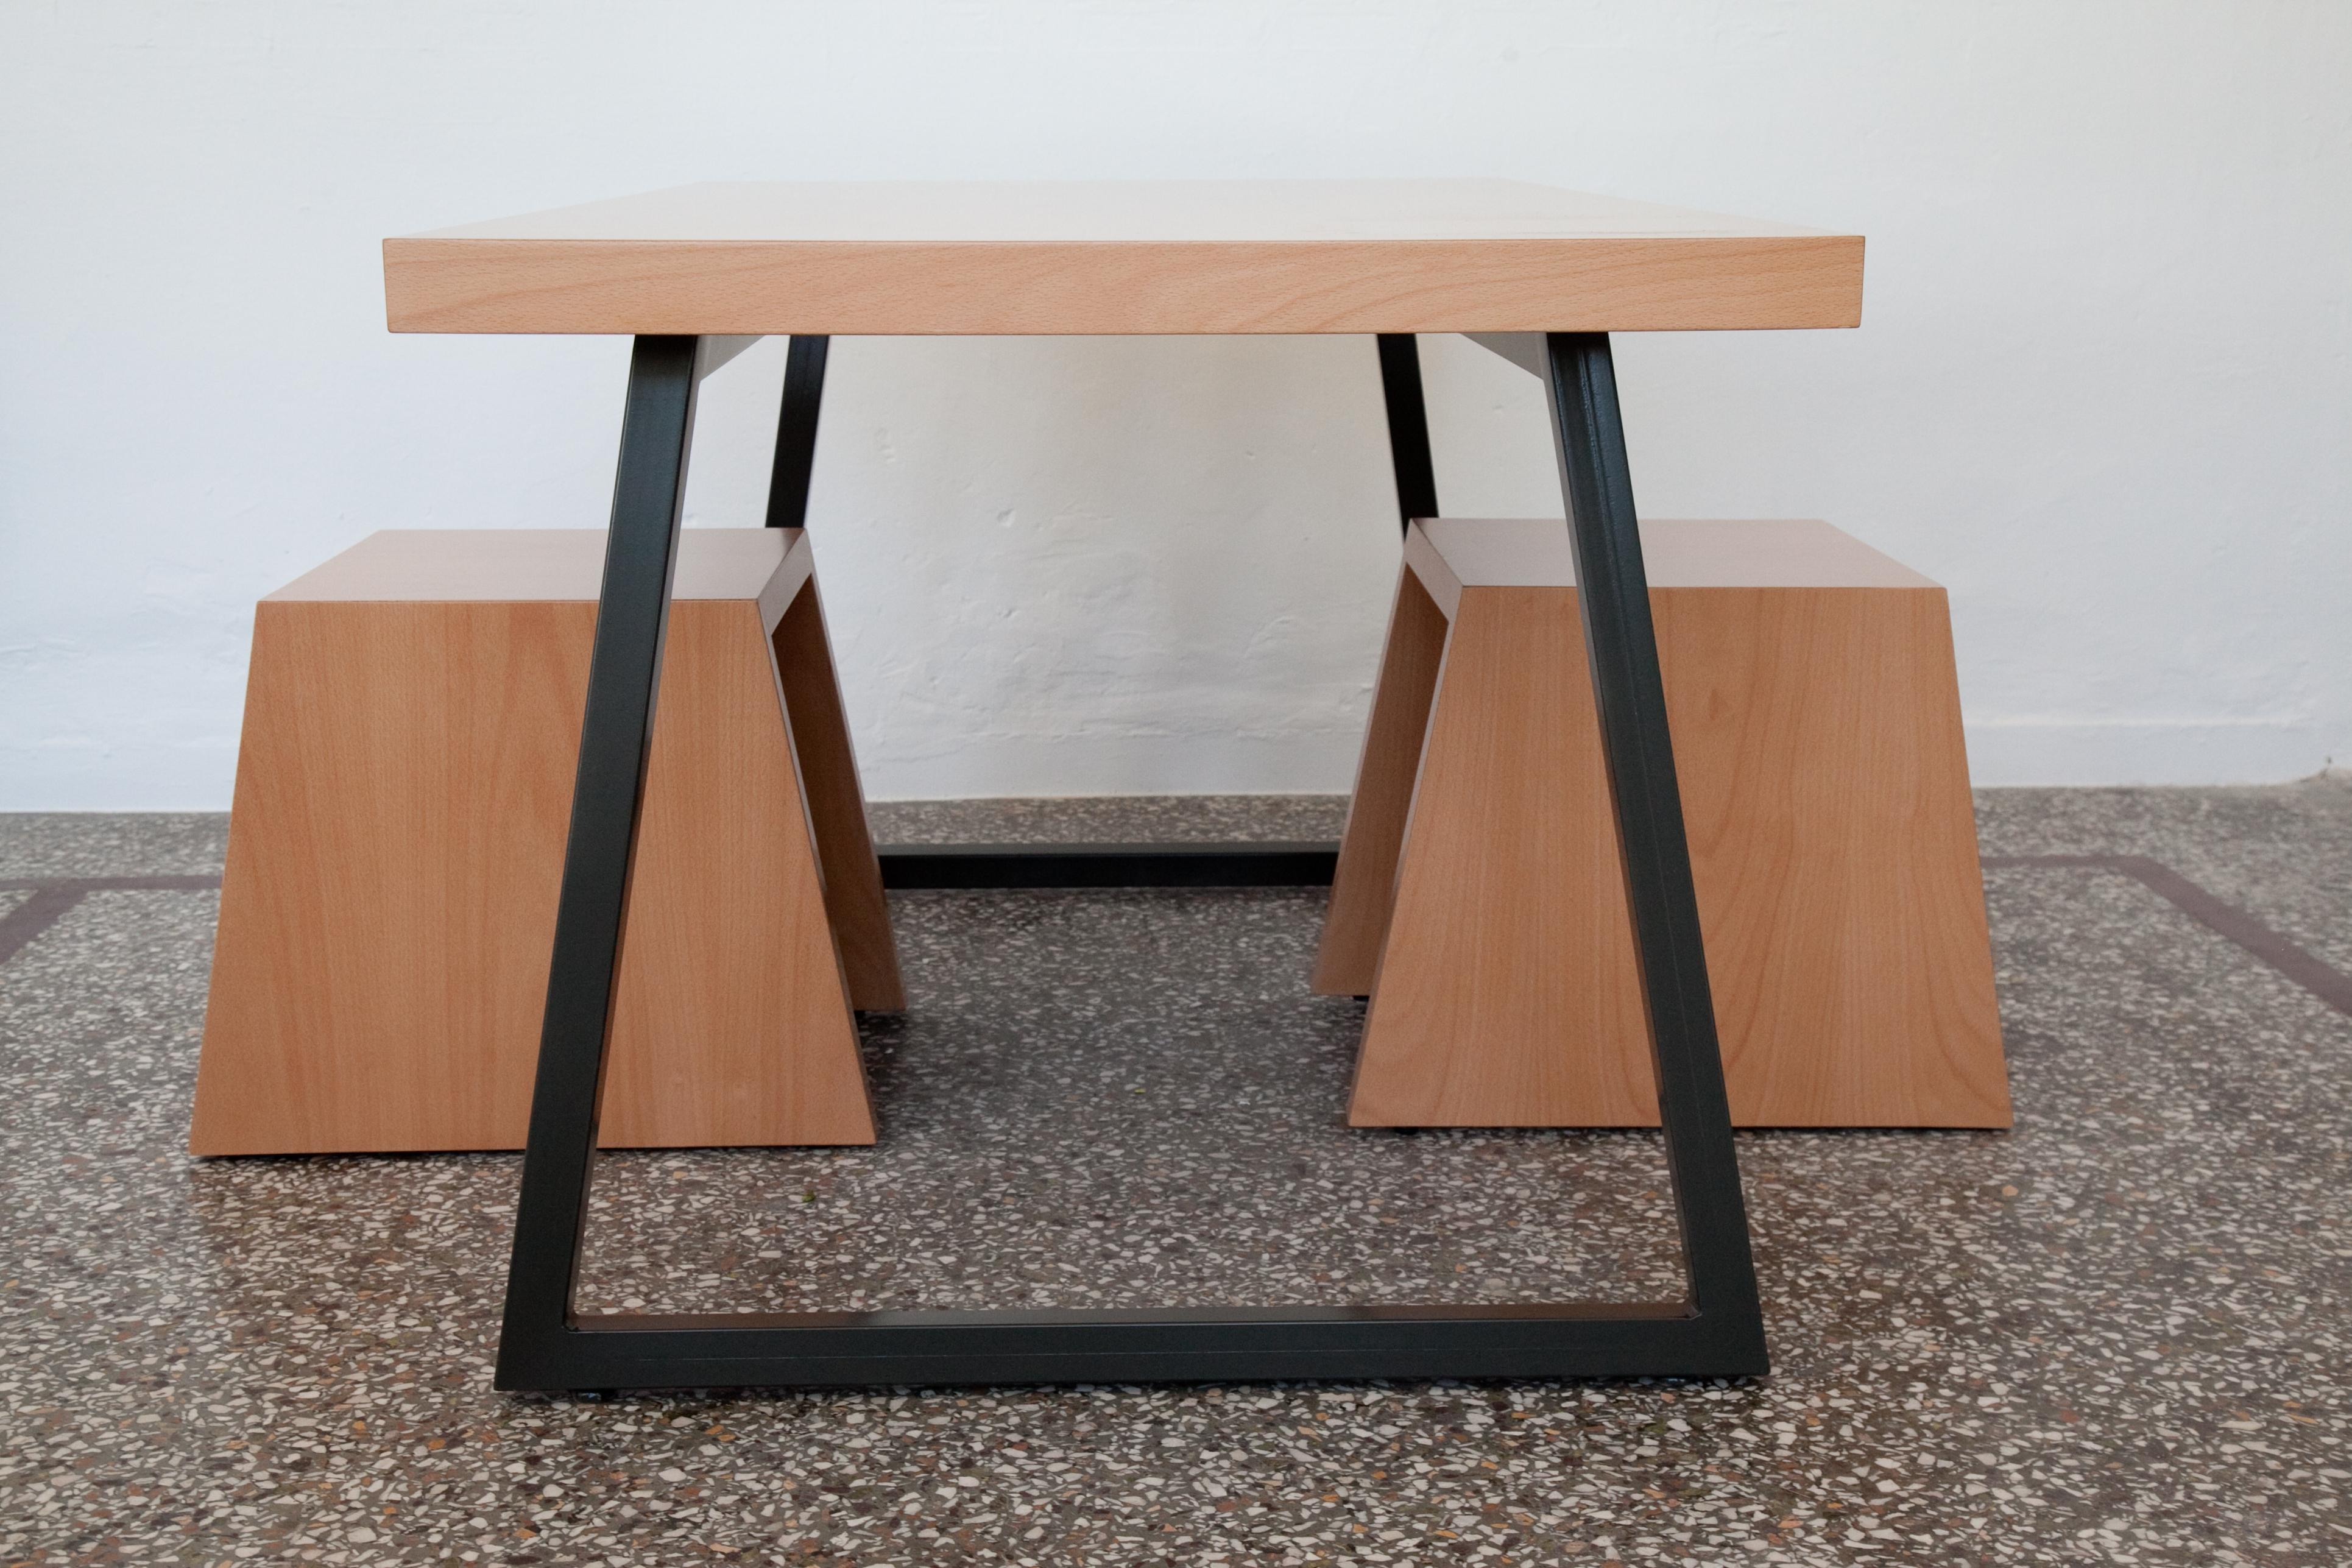 21st Century, Minimalist, European, Beechwood Table with Metal Base and a Stool In Excellent Condition For Sale In Tinos, Cyclades